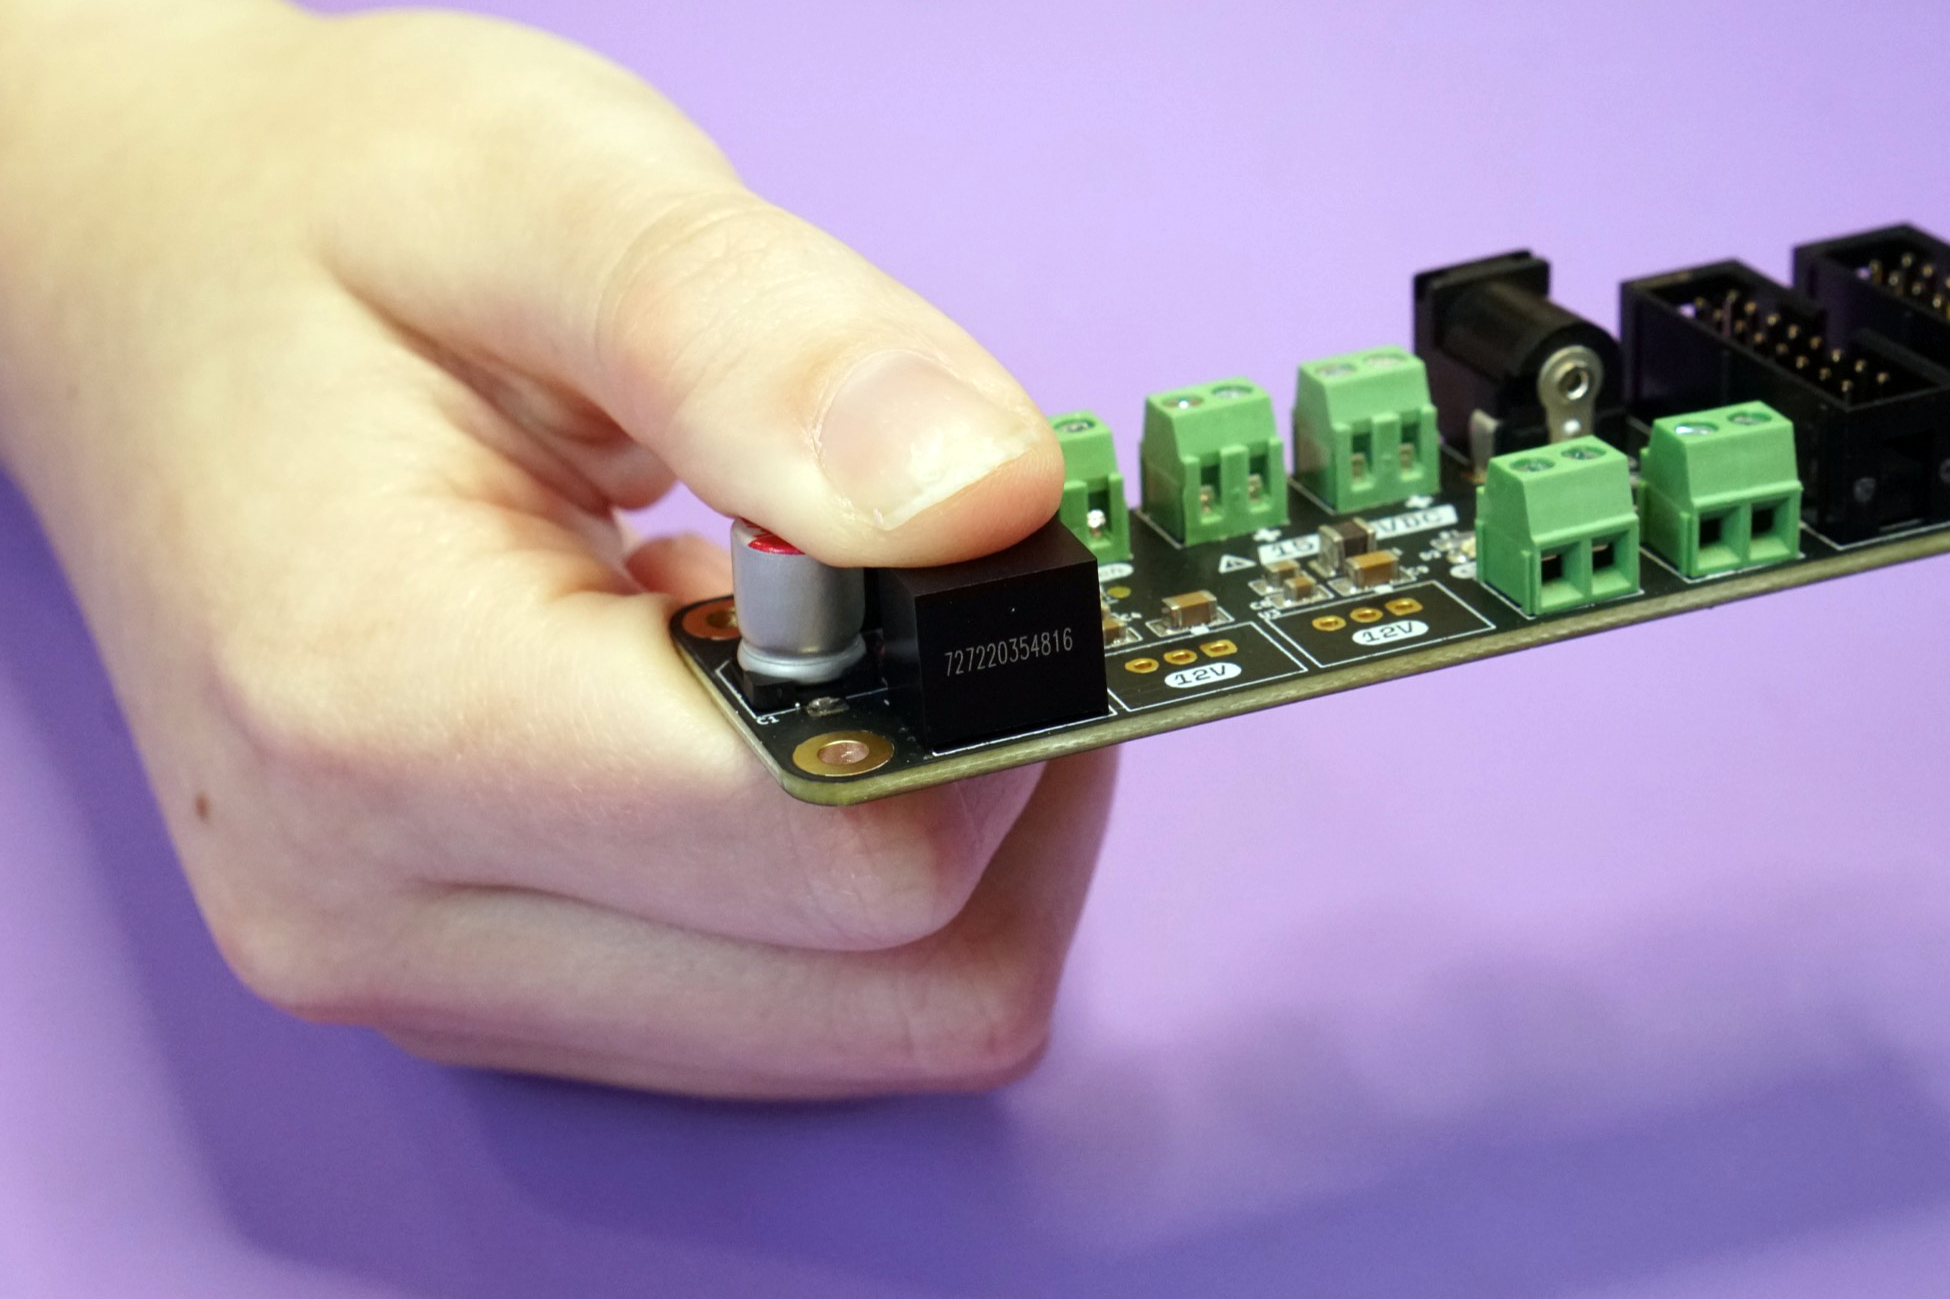 Photo of the 5V converter placed onto the front side of the board